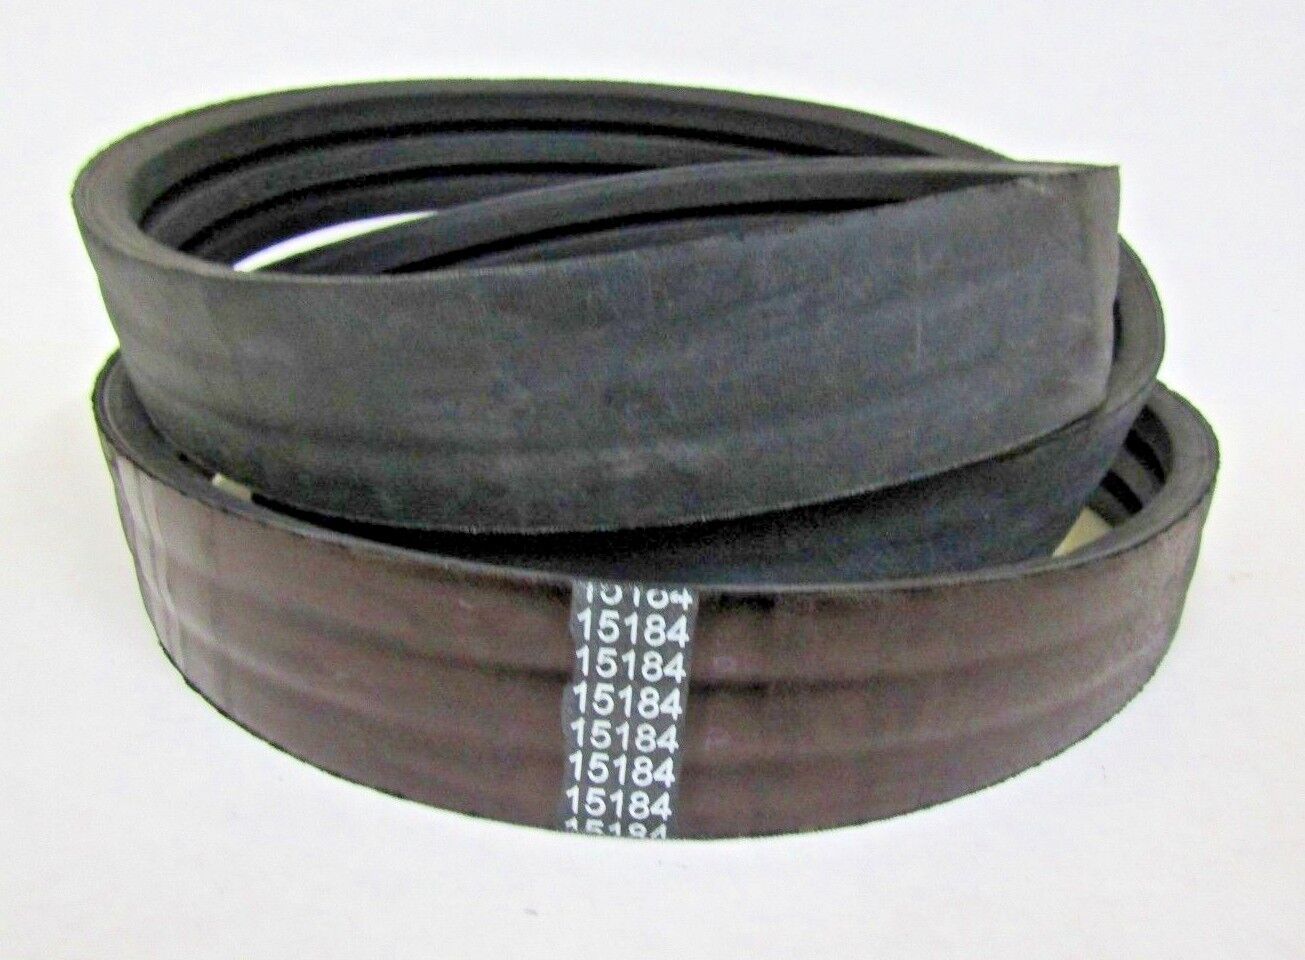 NEW OEM SPEC MADE DRIVE BELT WOODS 15184 FOR WOODS 114 MOWER 3 BANDED